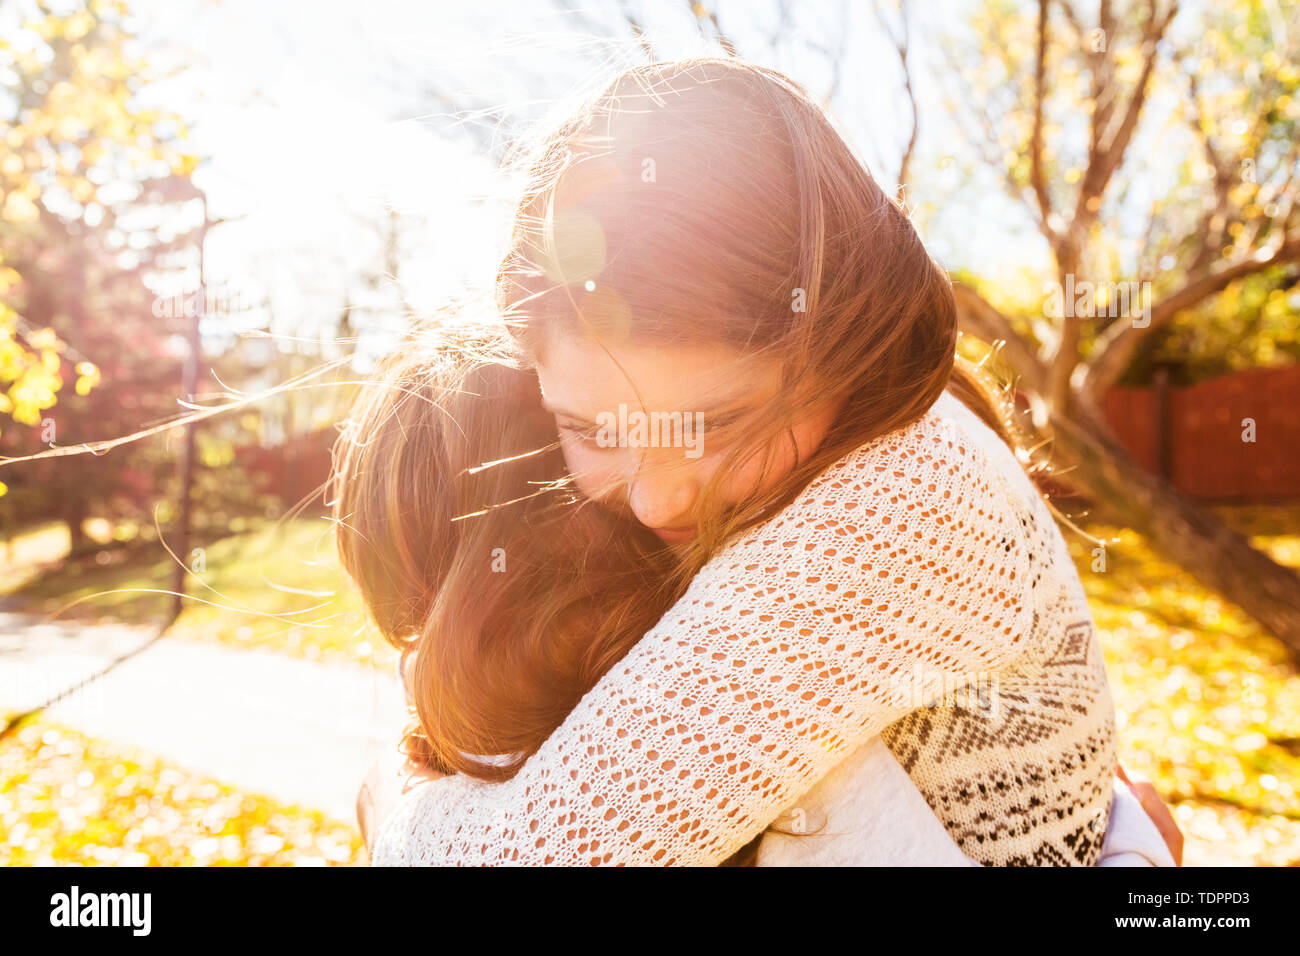 Two sisters hugging each other in a city park on a warm autumn day: Edmonton, Alberta, Canada Stock Photo